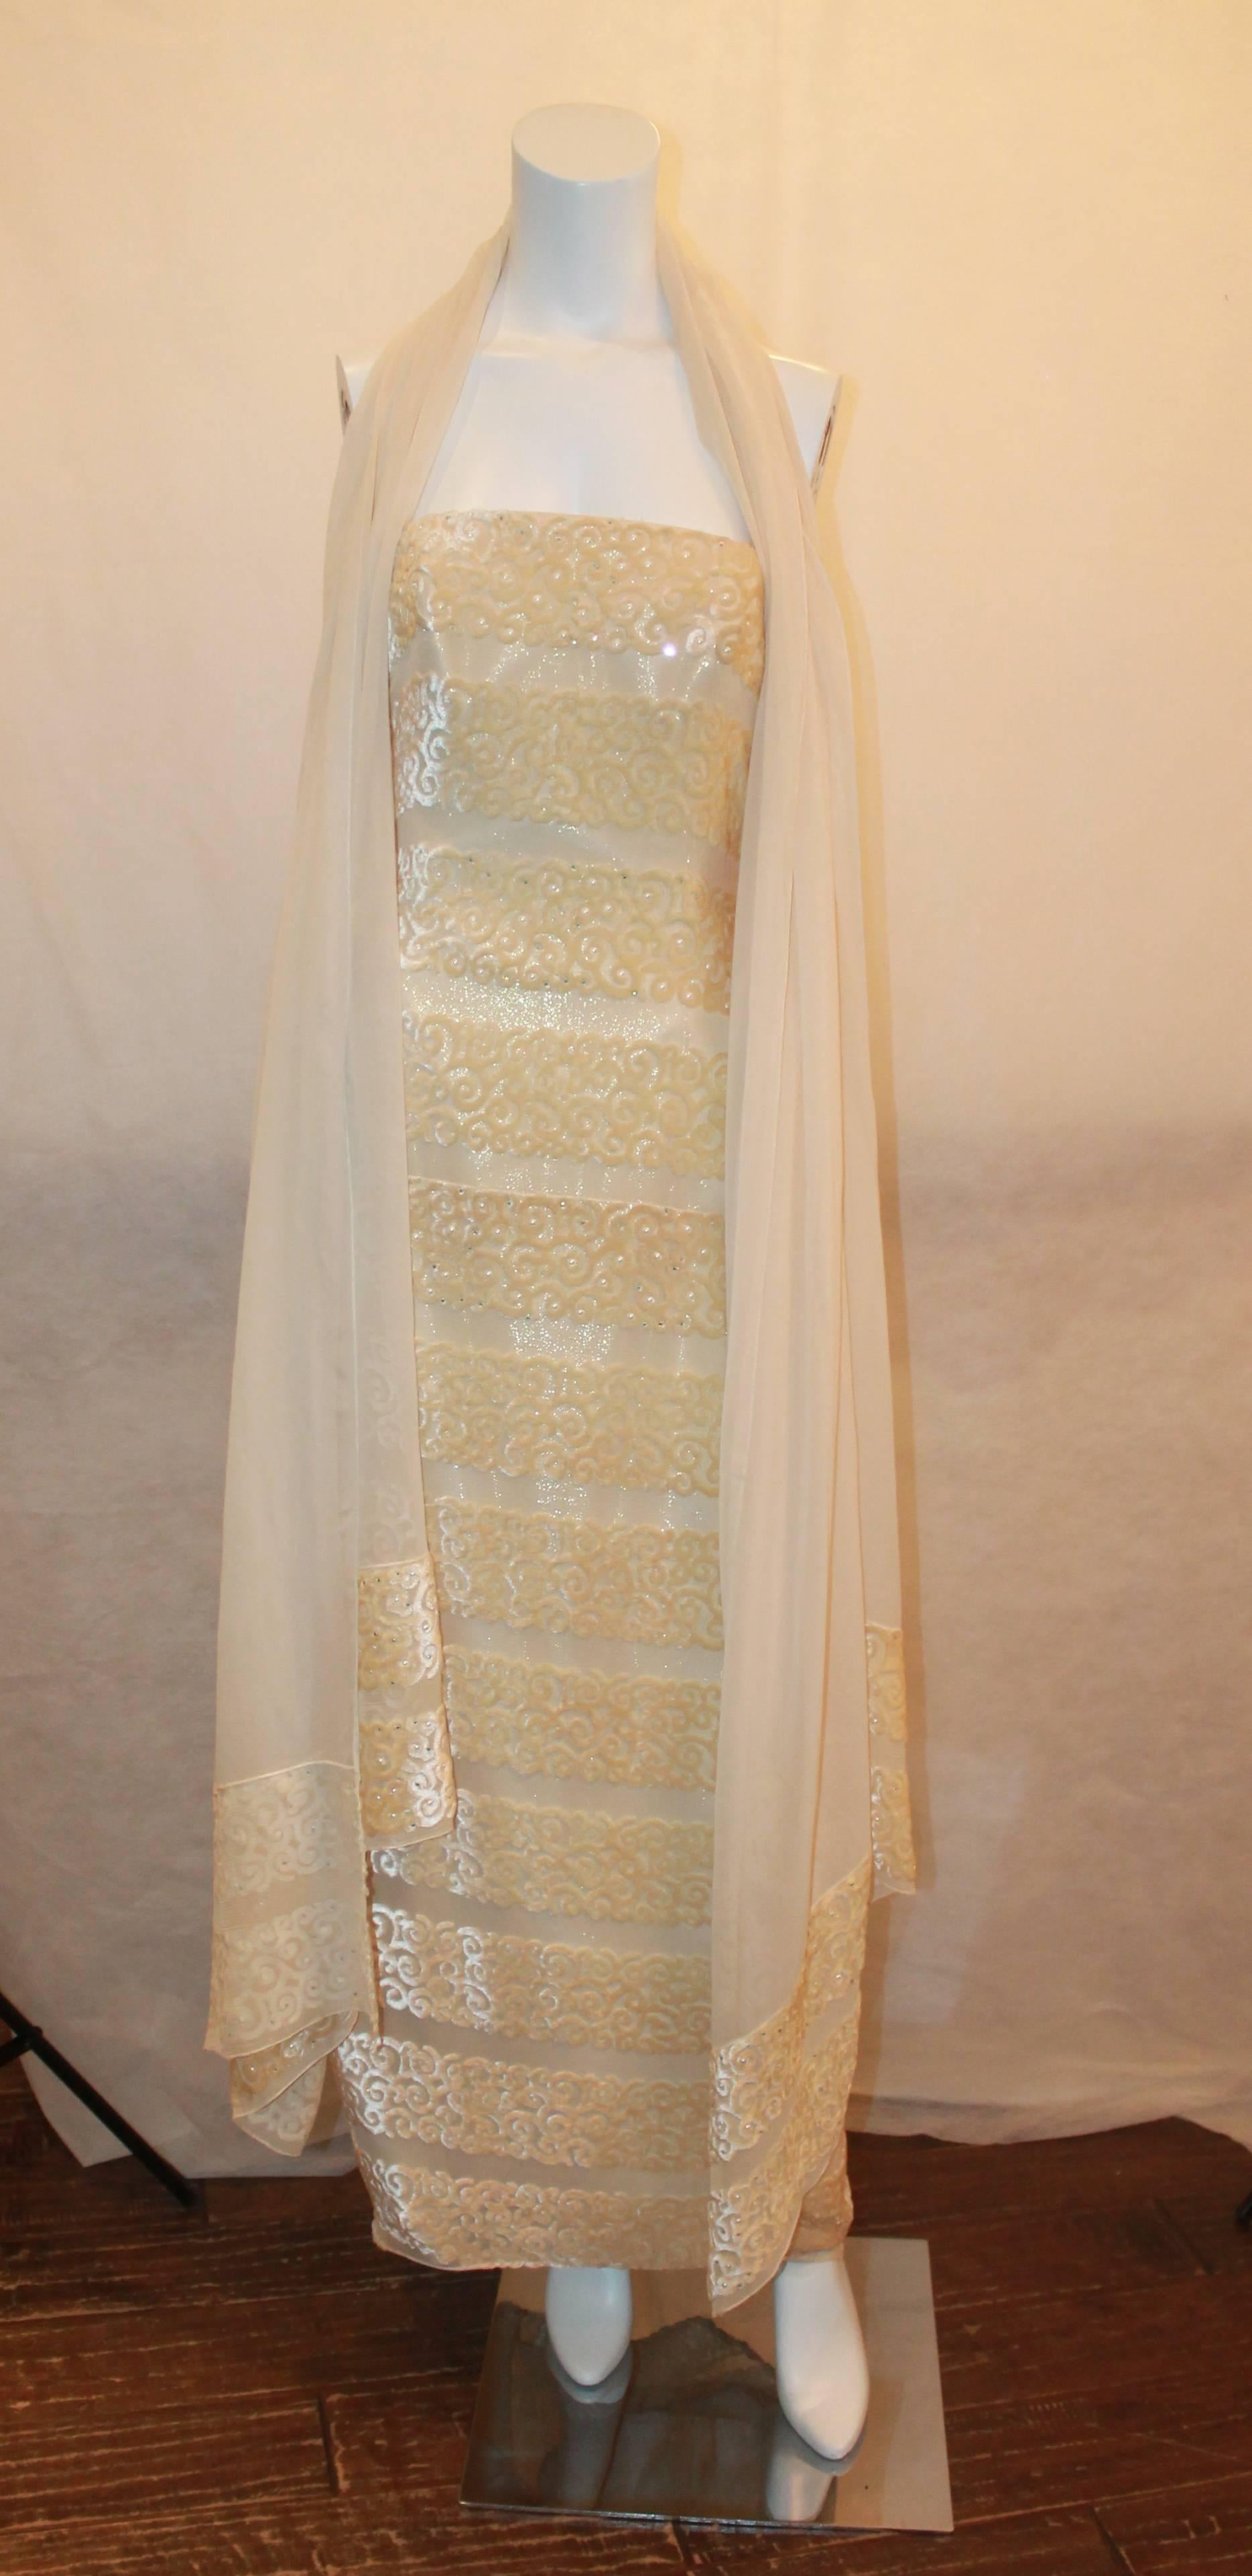 Michael Casey Silk Chiffon & Ivory Cut Velvet Strapless Gown - 10.  This gorgeous gown is in excellent condition.  It features a gorgeous ivory silk chiffon material, paneled velvet swirls, a straight across neckline, a gathered bustled back with